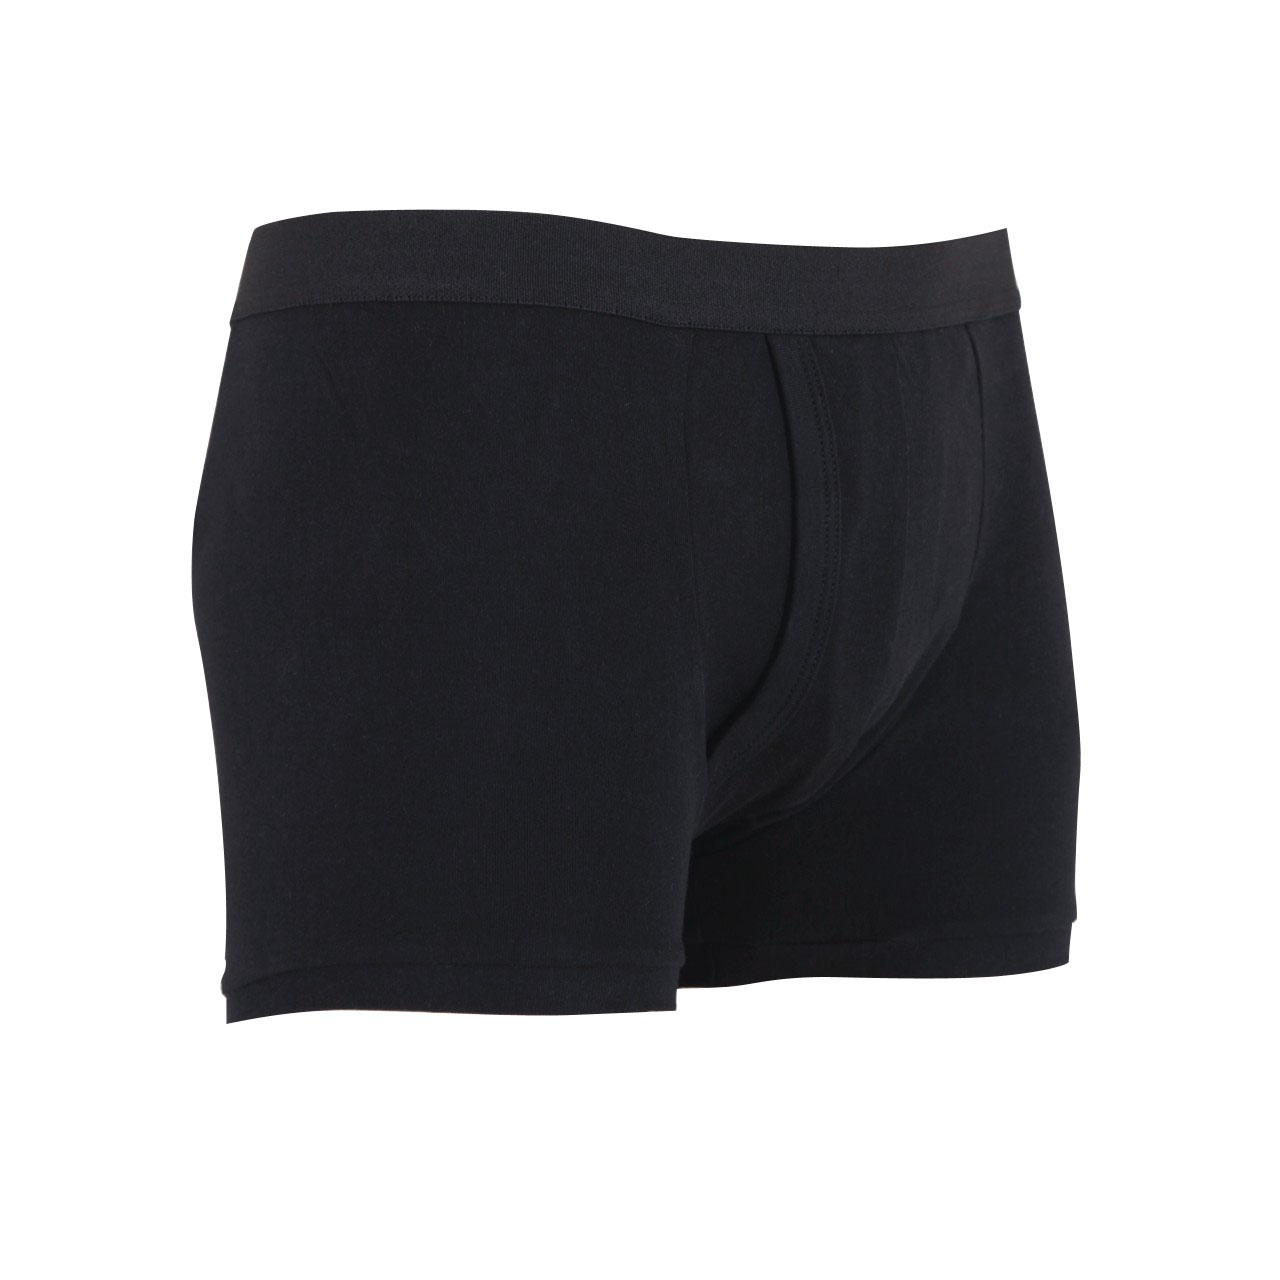 Super Absorbent Mens Boxers Single